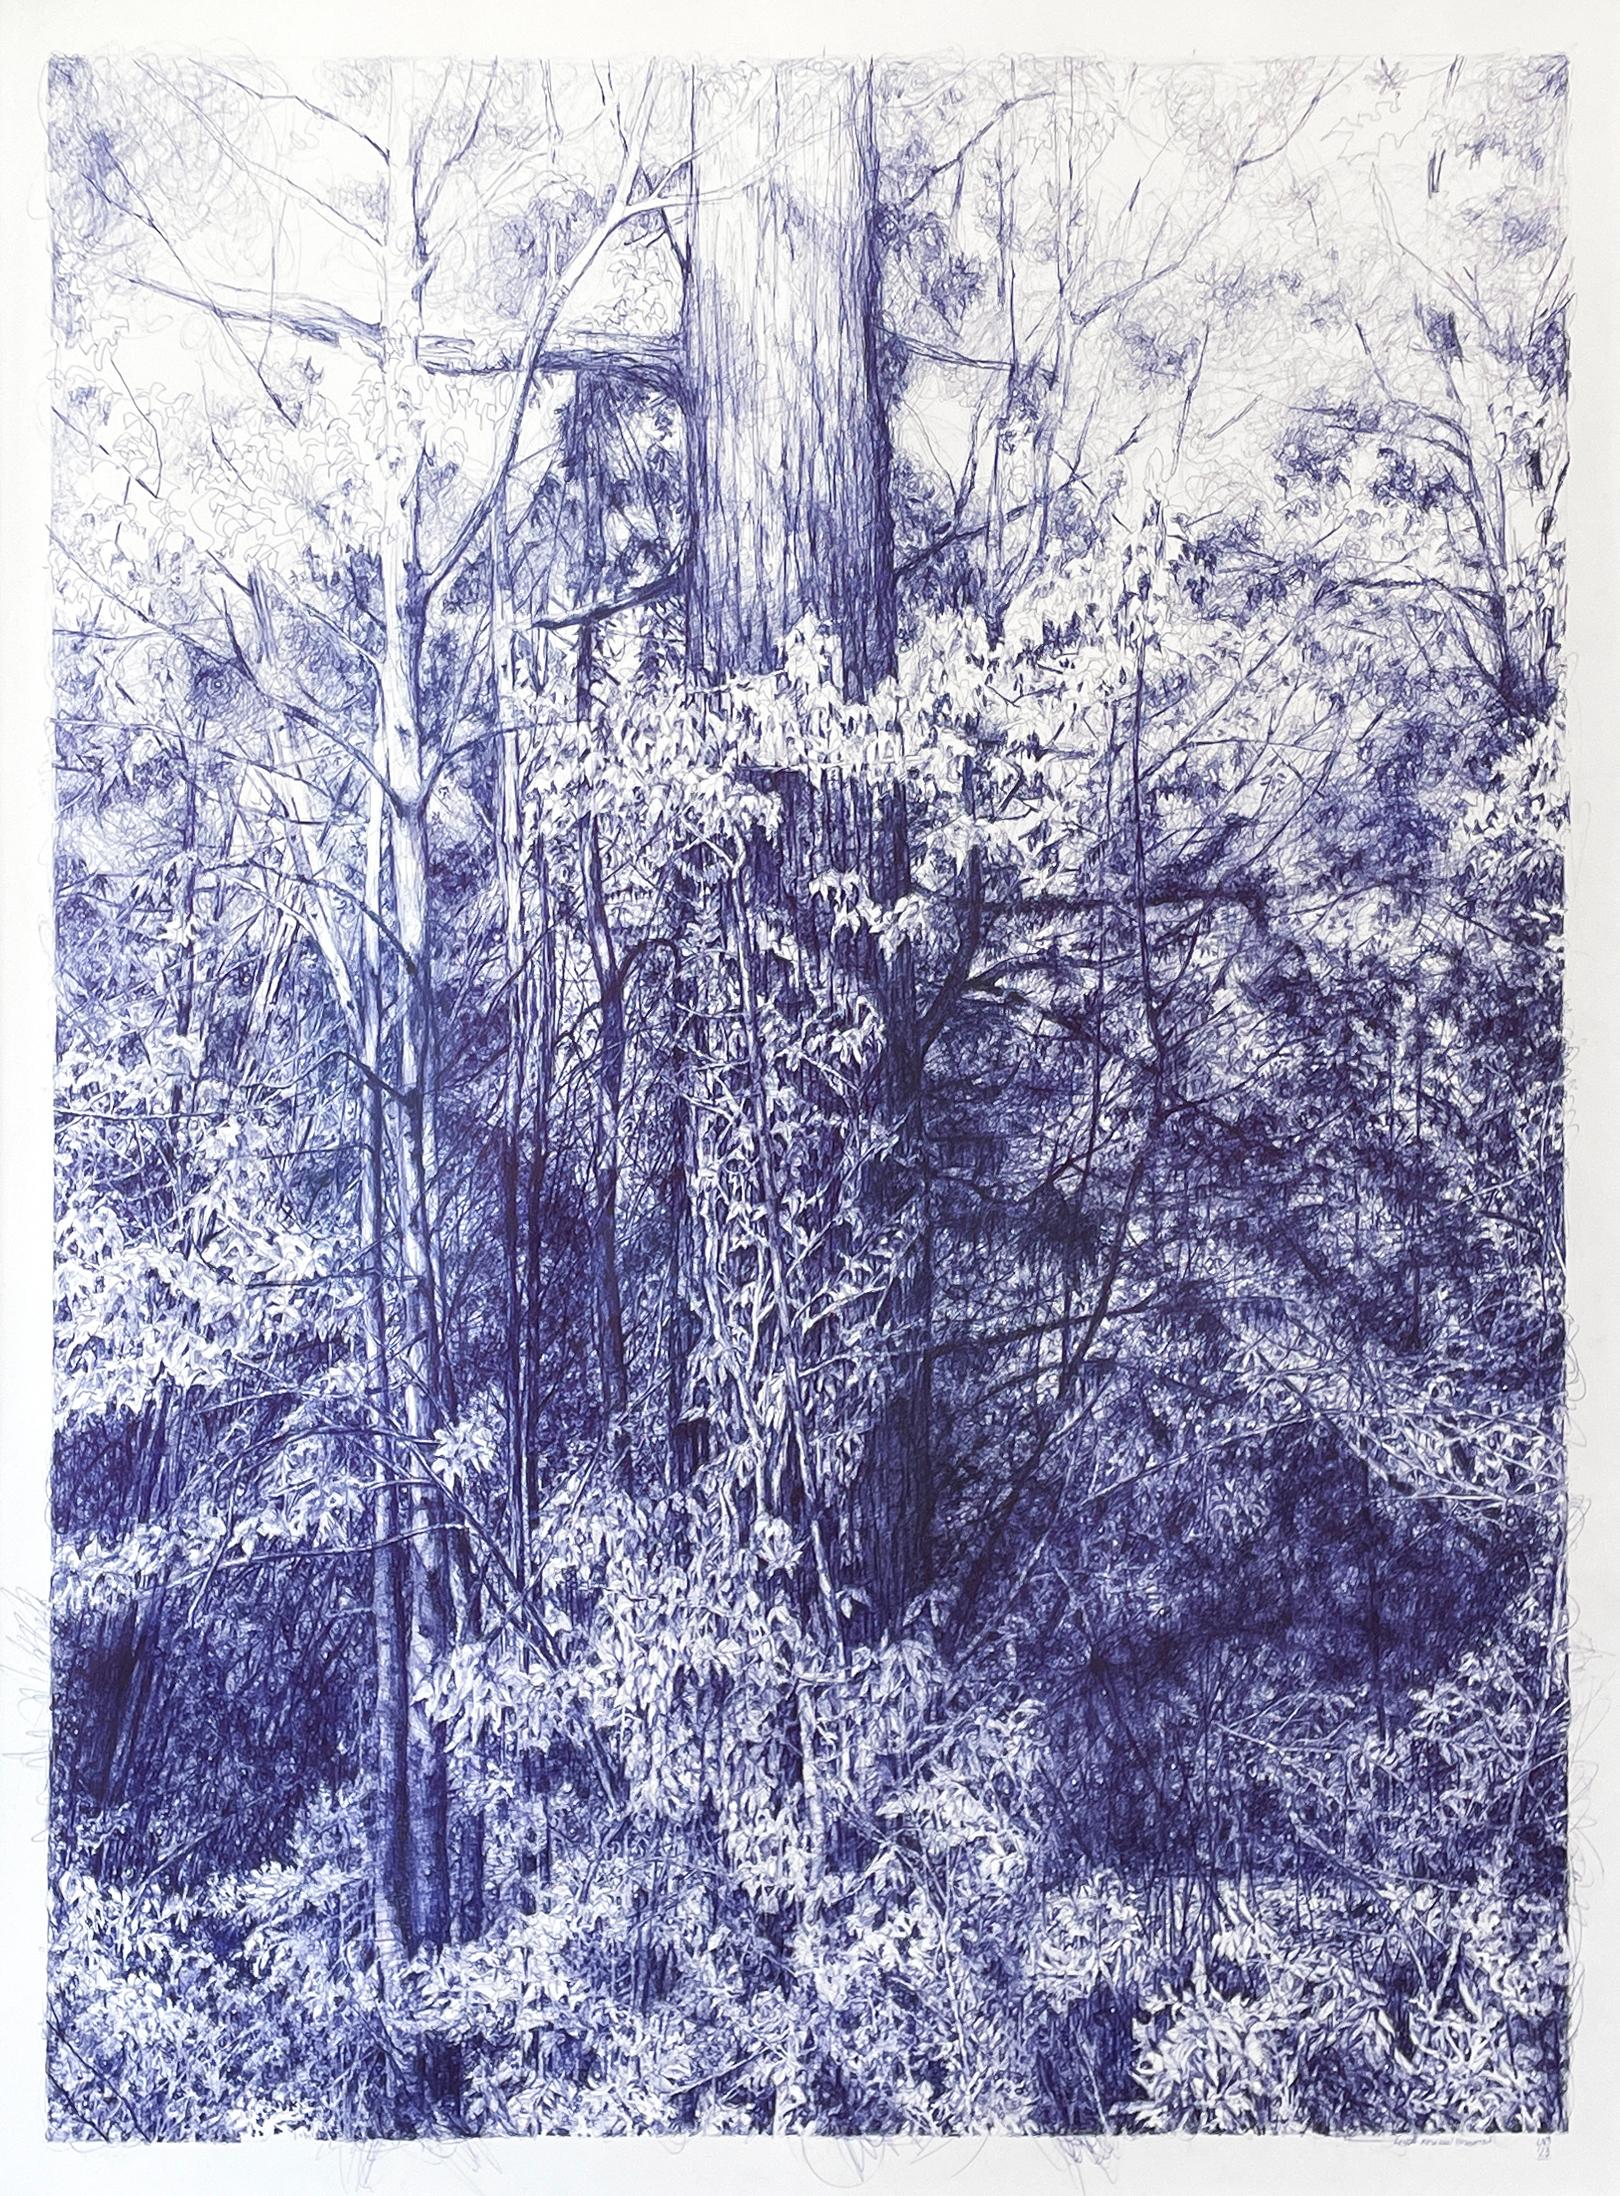 Linda Newman Boughton Landscape Art - Oracle of Bastet (Blue Ballpoint Pen Drawing of Forested Landscape with Trees)